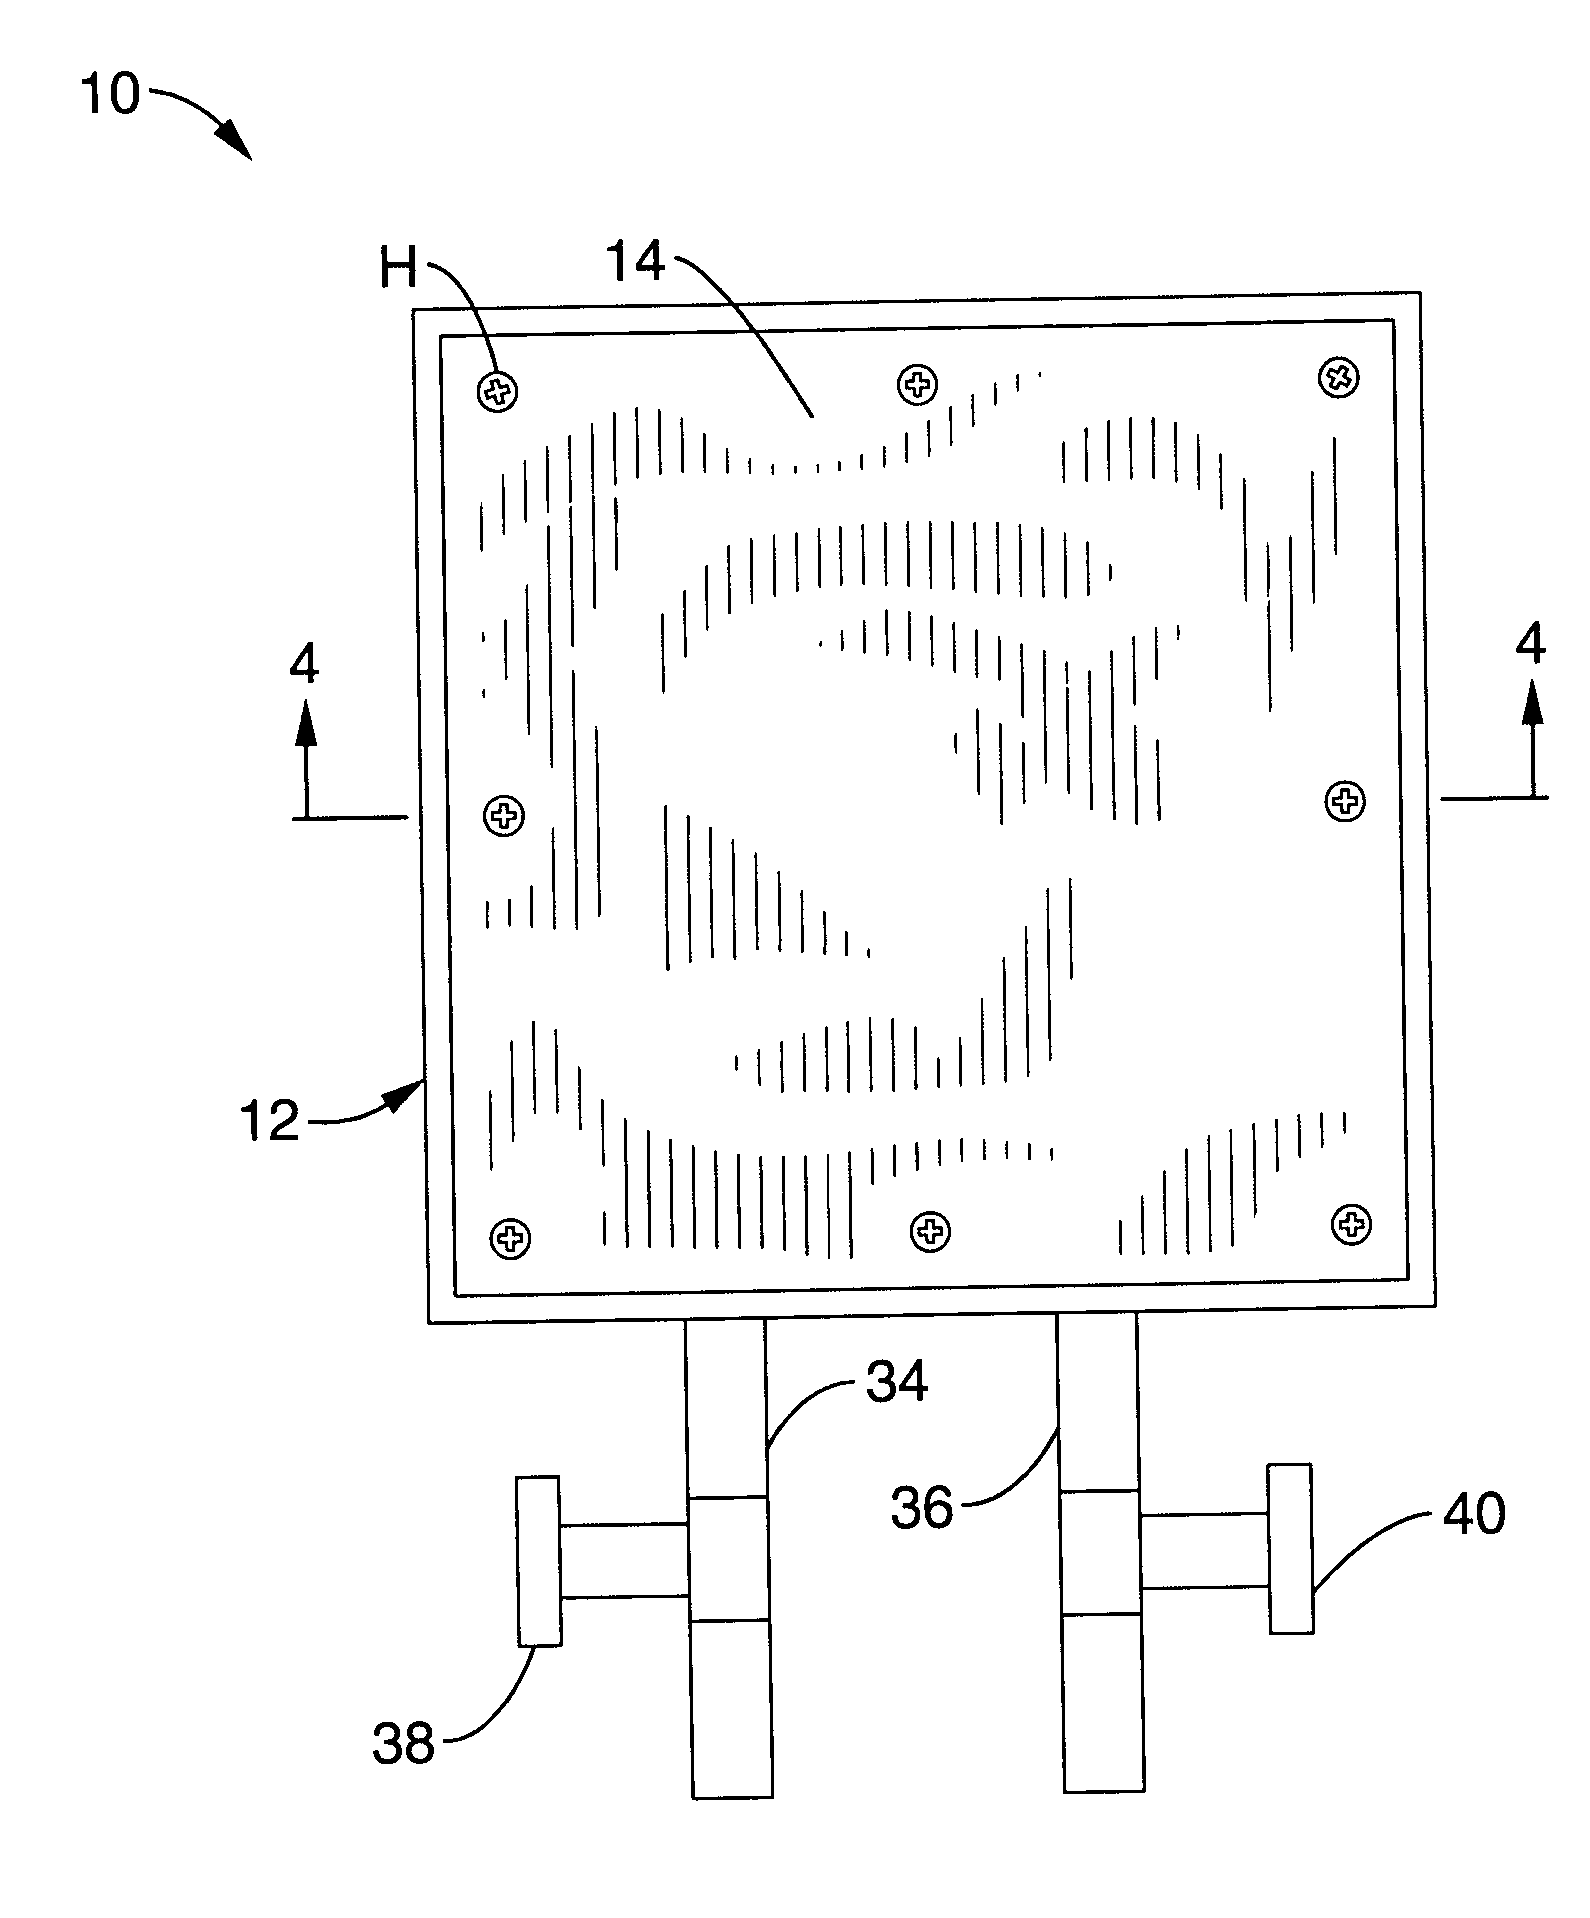 Neutron and gamma detector using an ionization chamber with an integrated body and moderator